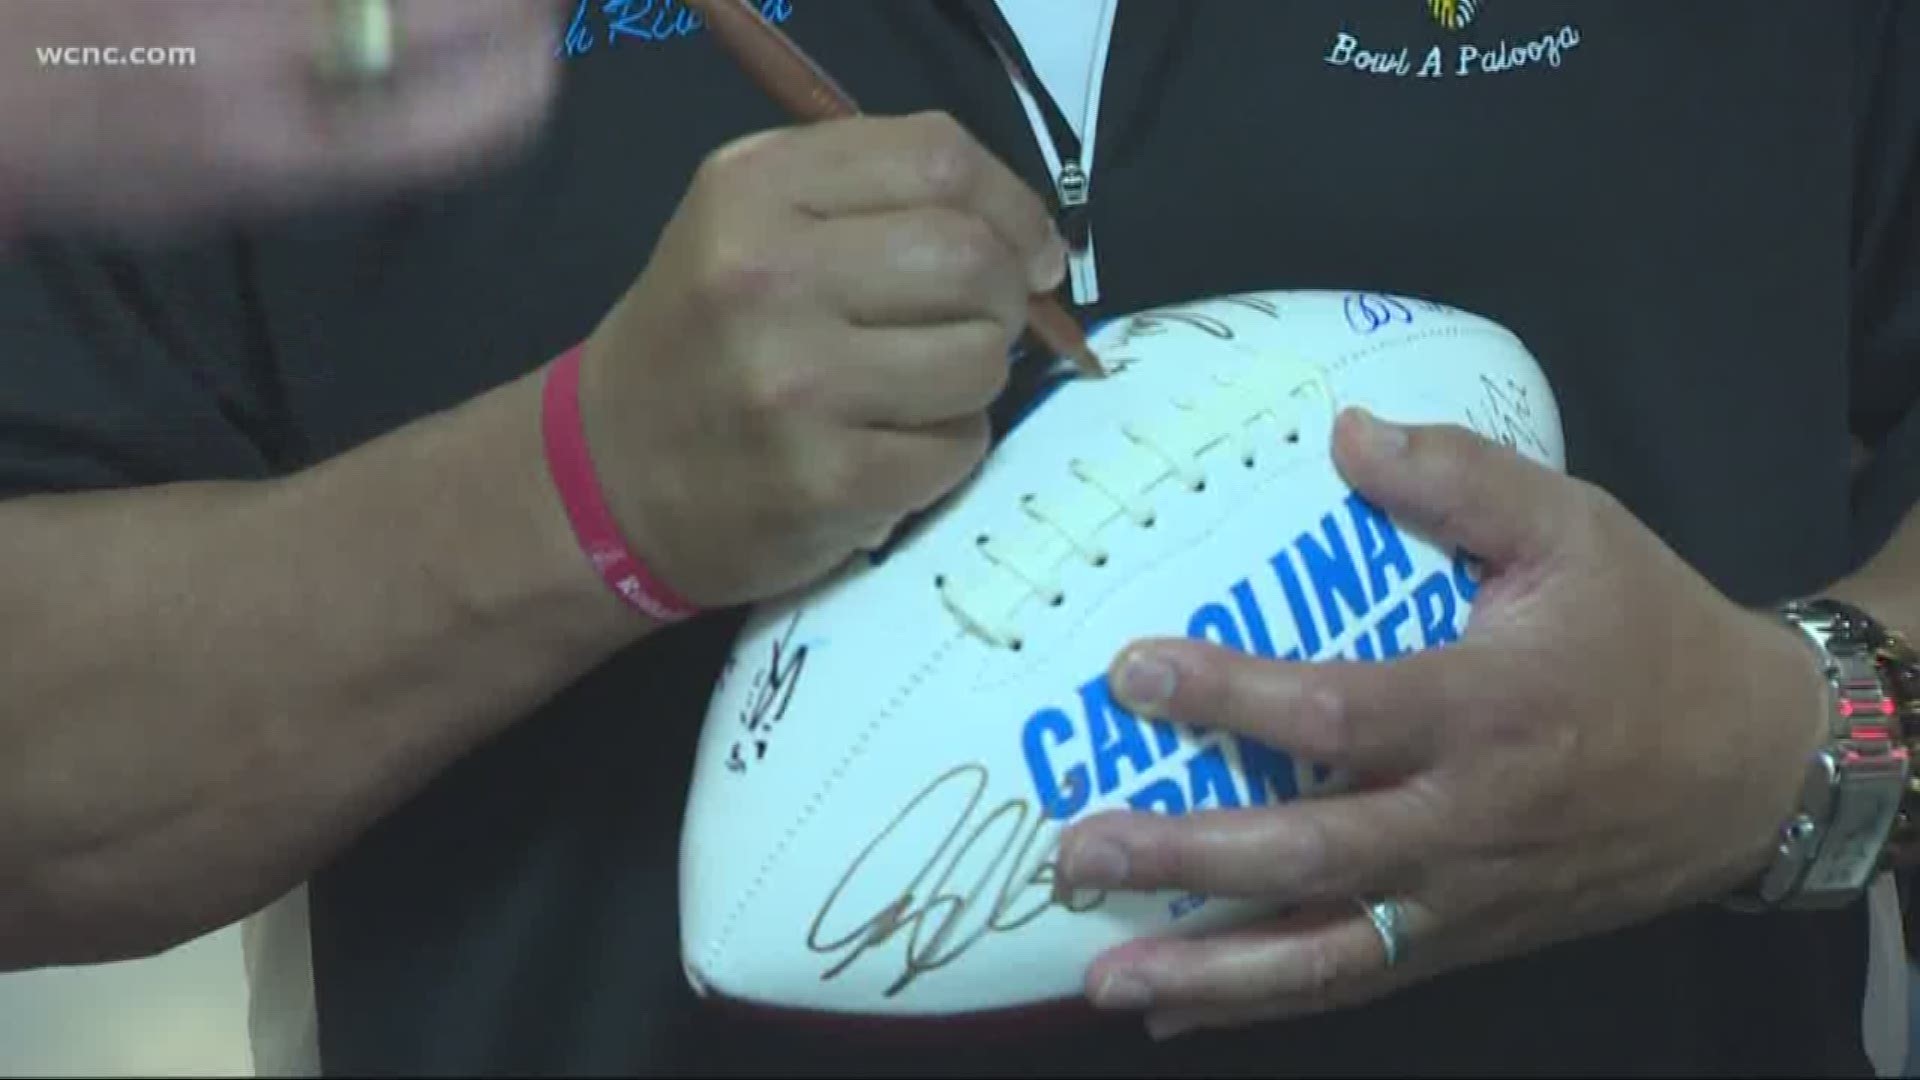 Panthers coach Ron Rivera hosted his sixth annual charity bowling event in Matthews.